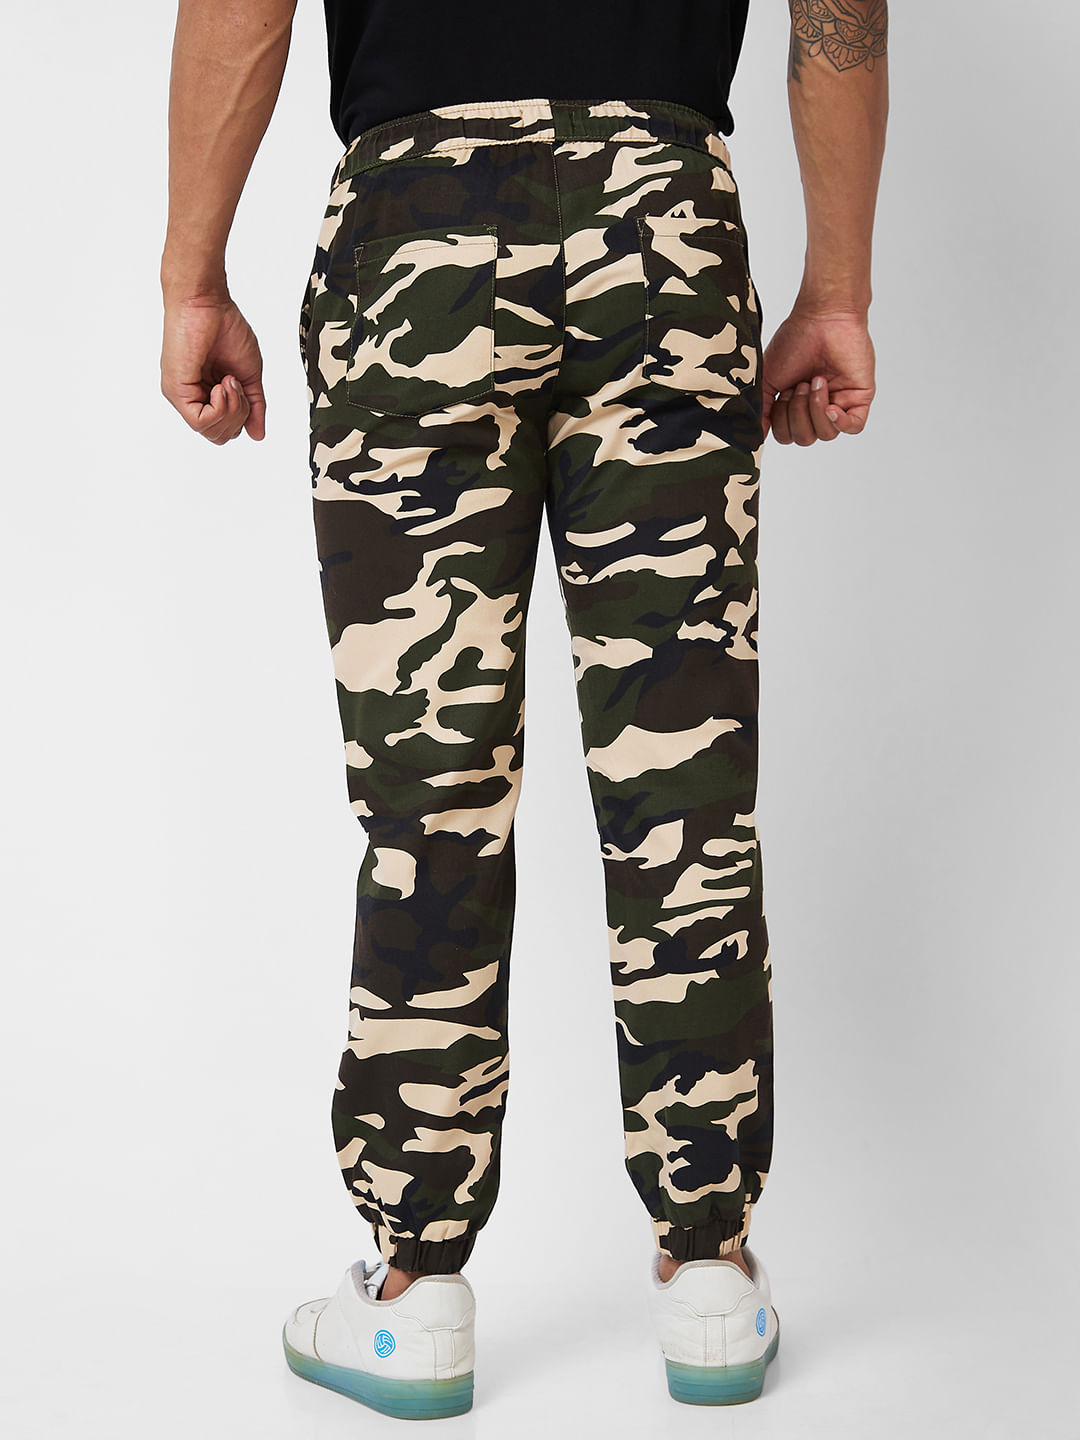 XFLWAM Camo Cargo Pants for Women High Waisted Camouflage Jogger Pants  Casual Slim Fit Sweatpants with Pocket Green XL - Walmart.com